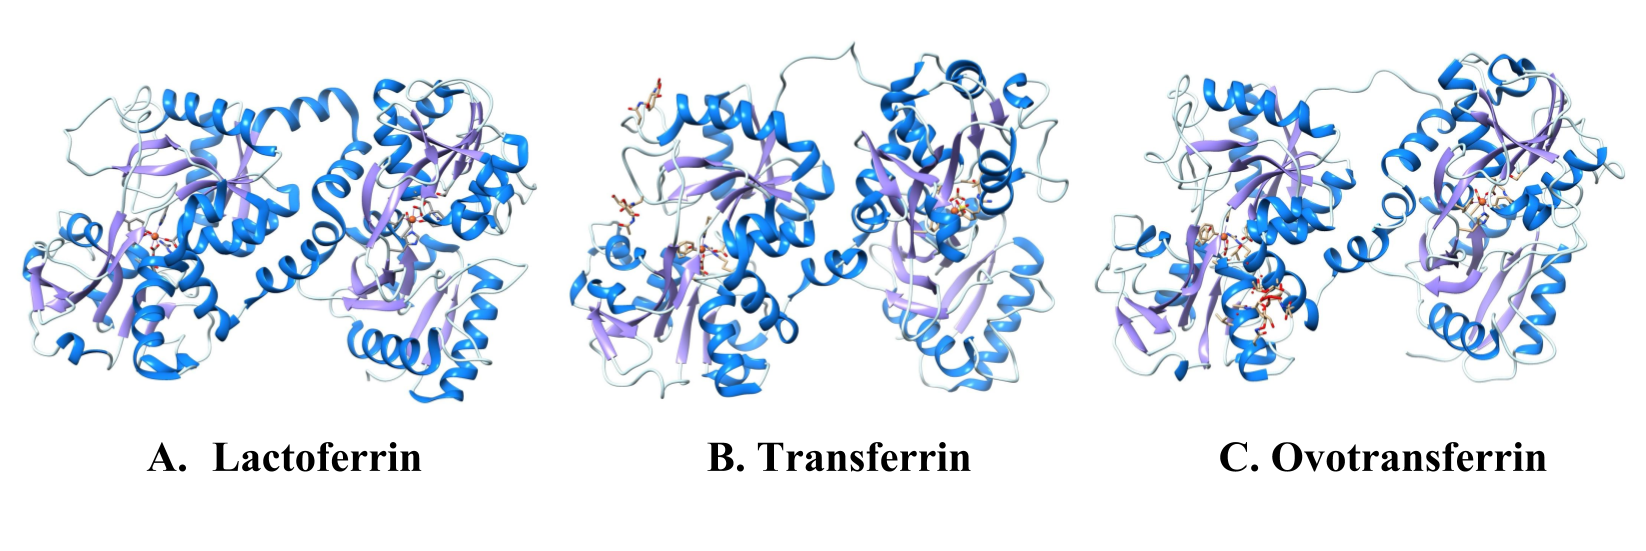 StructuralComparisonOfProteinsInTheTransferrinFamily.png